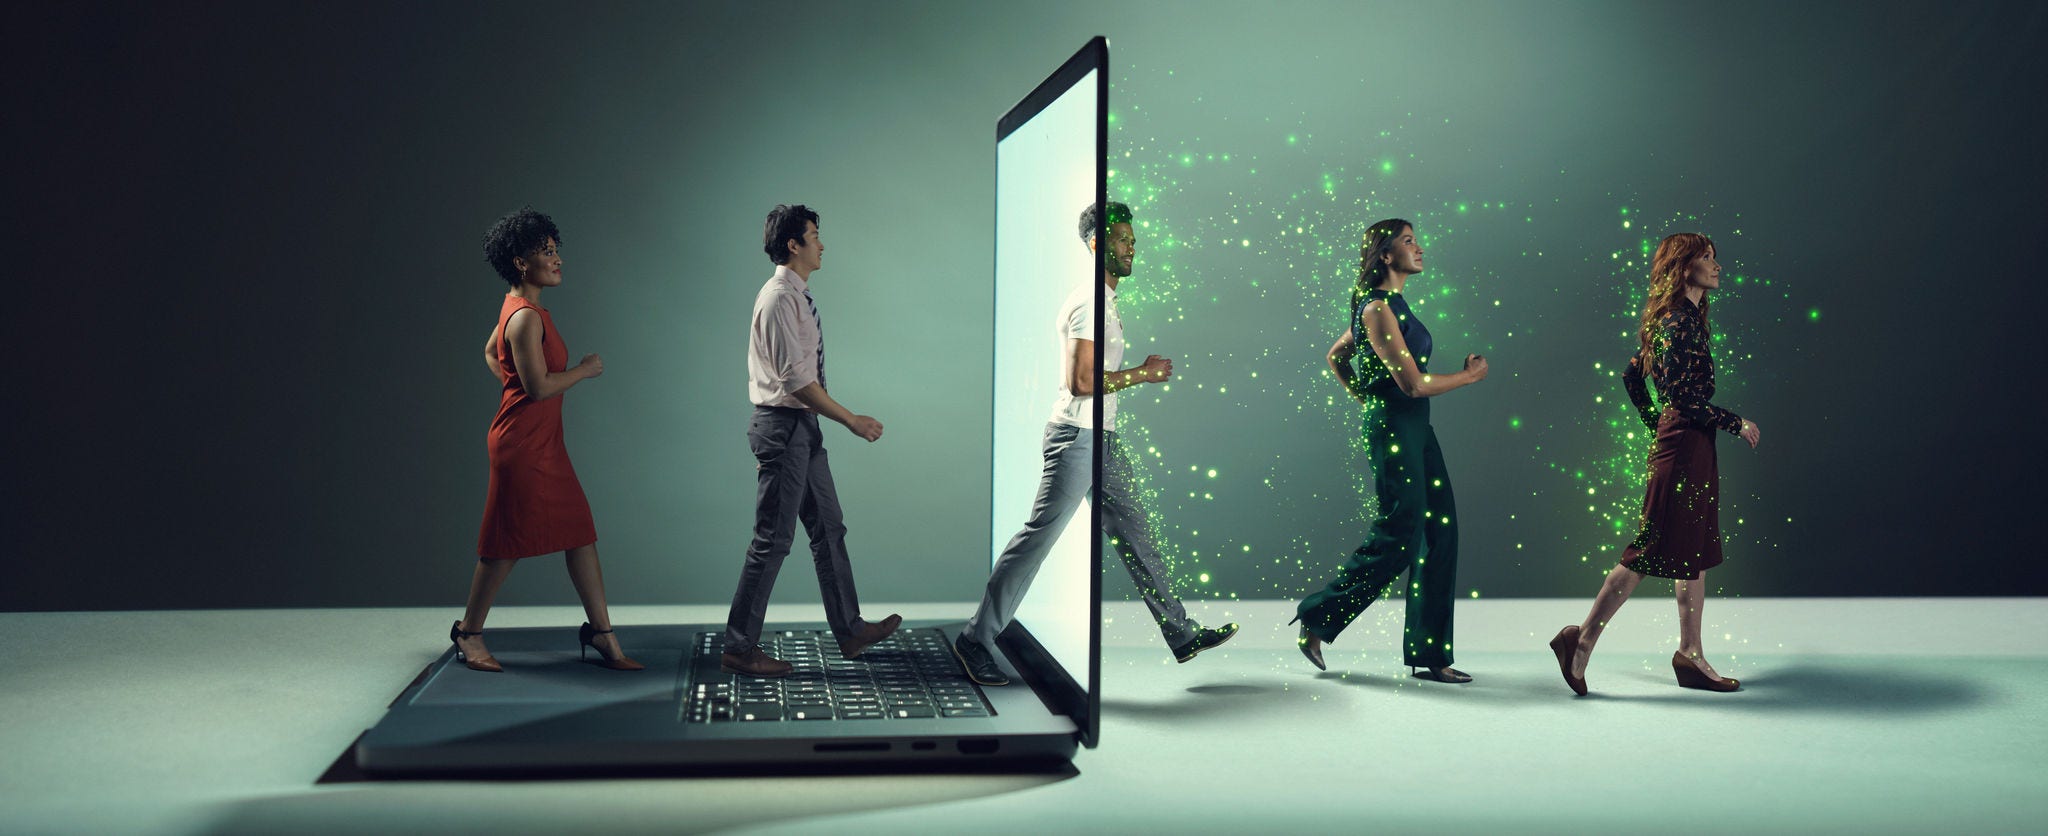 Art depicting a diverse group of workers walking through a computer screen, transformed into AI-empowered workers (represented by a high-tech green glow).